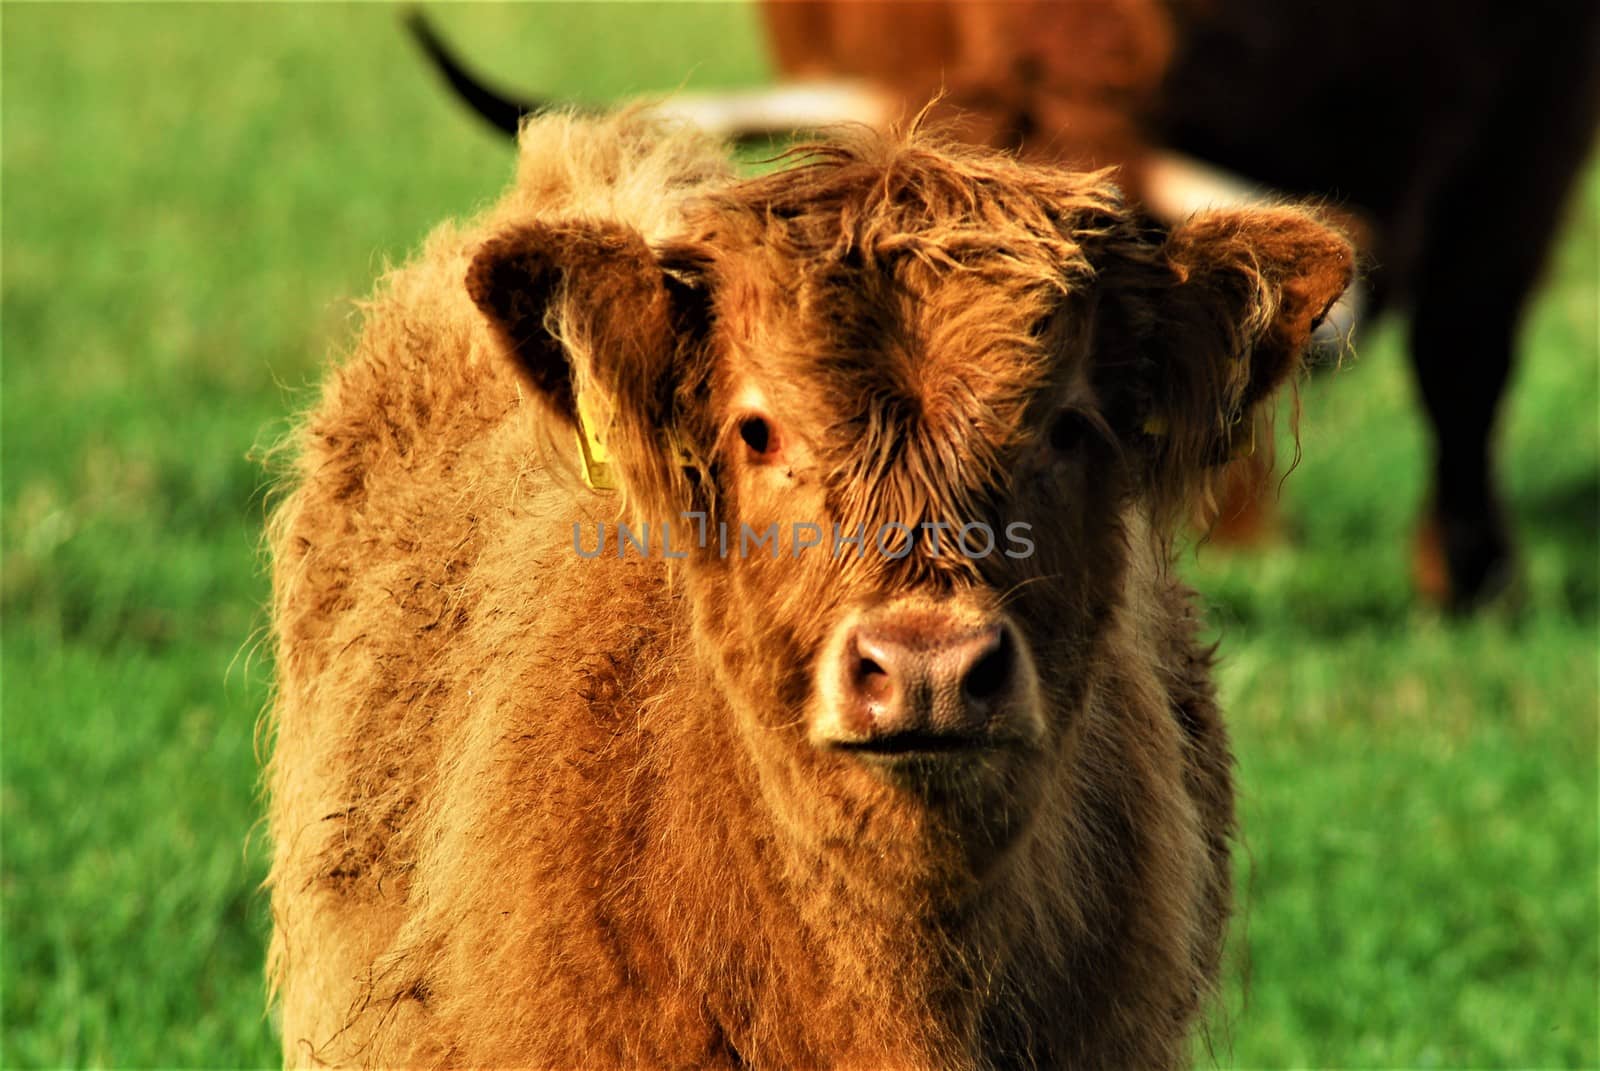 Face of a galloway calf as a portrait